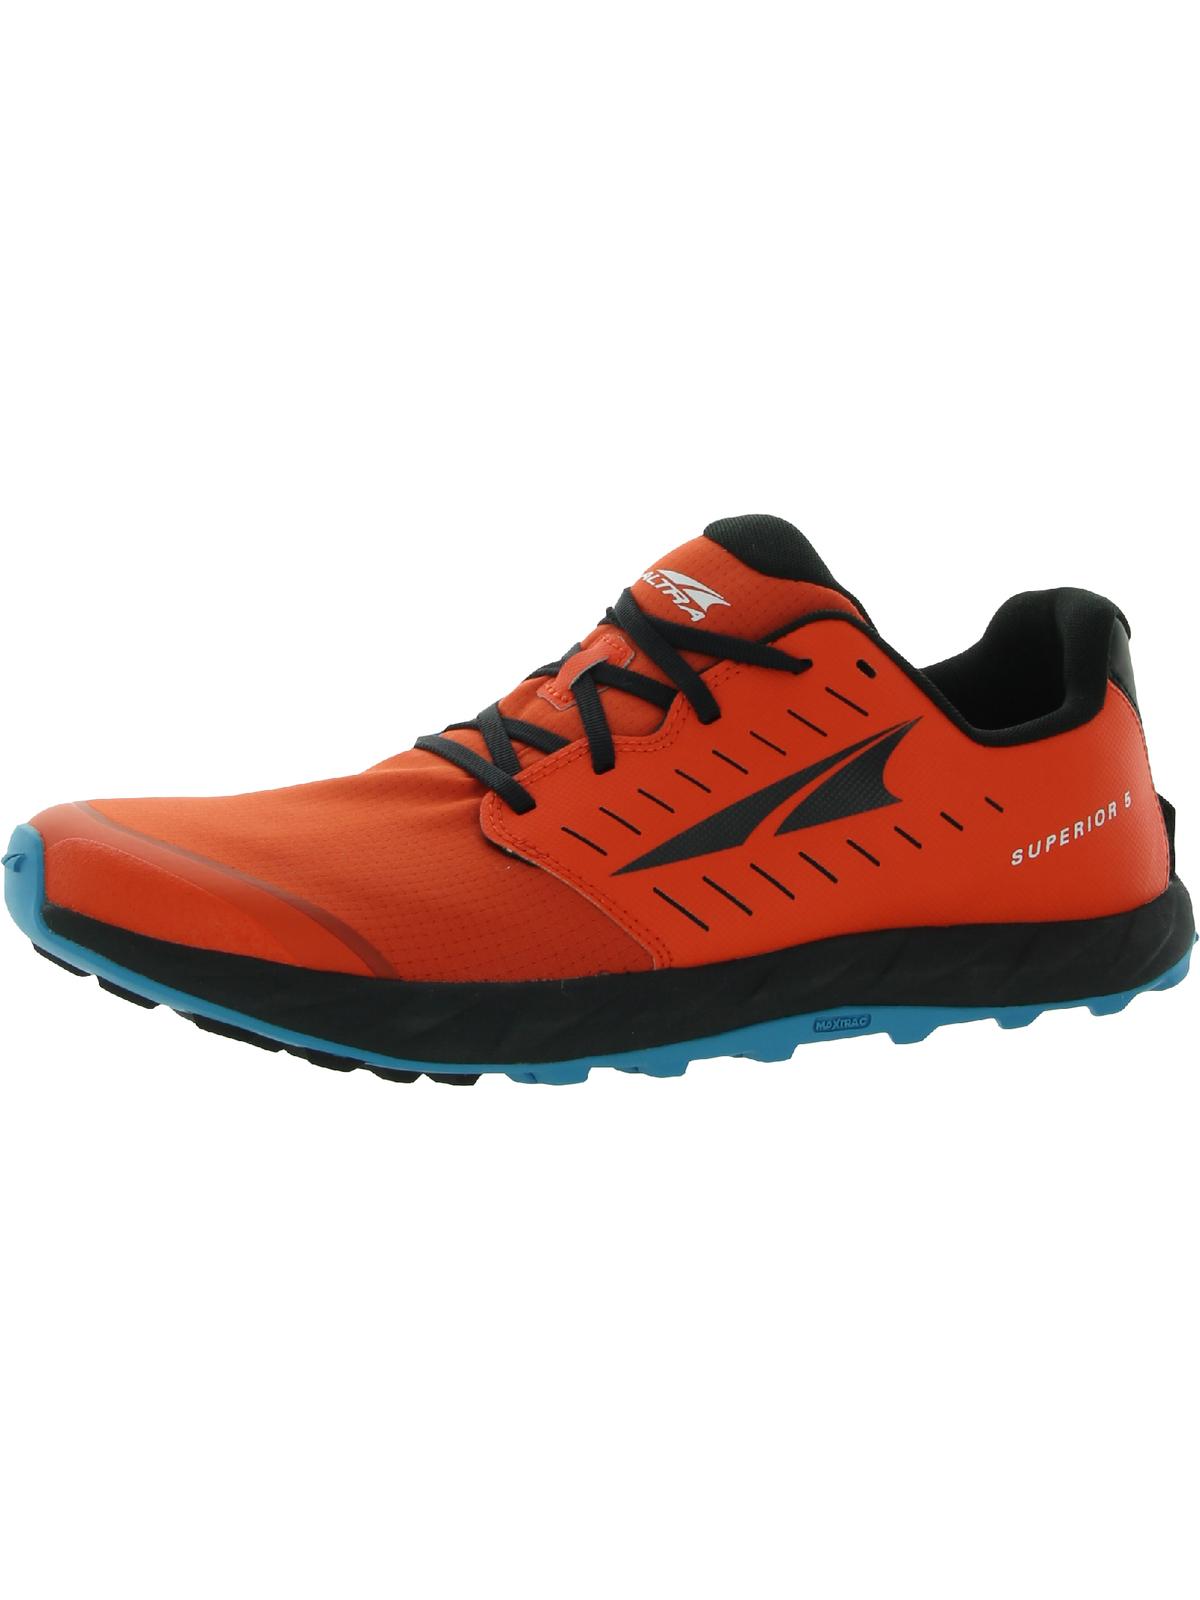 ALTRA Superior 5 Mens Fitness Gym Running Shoes